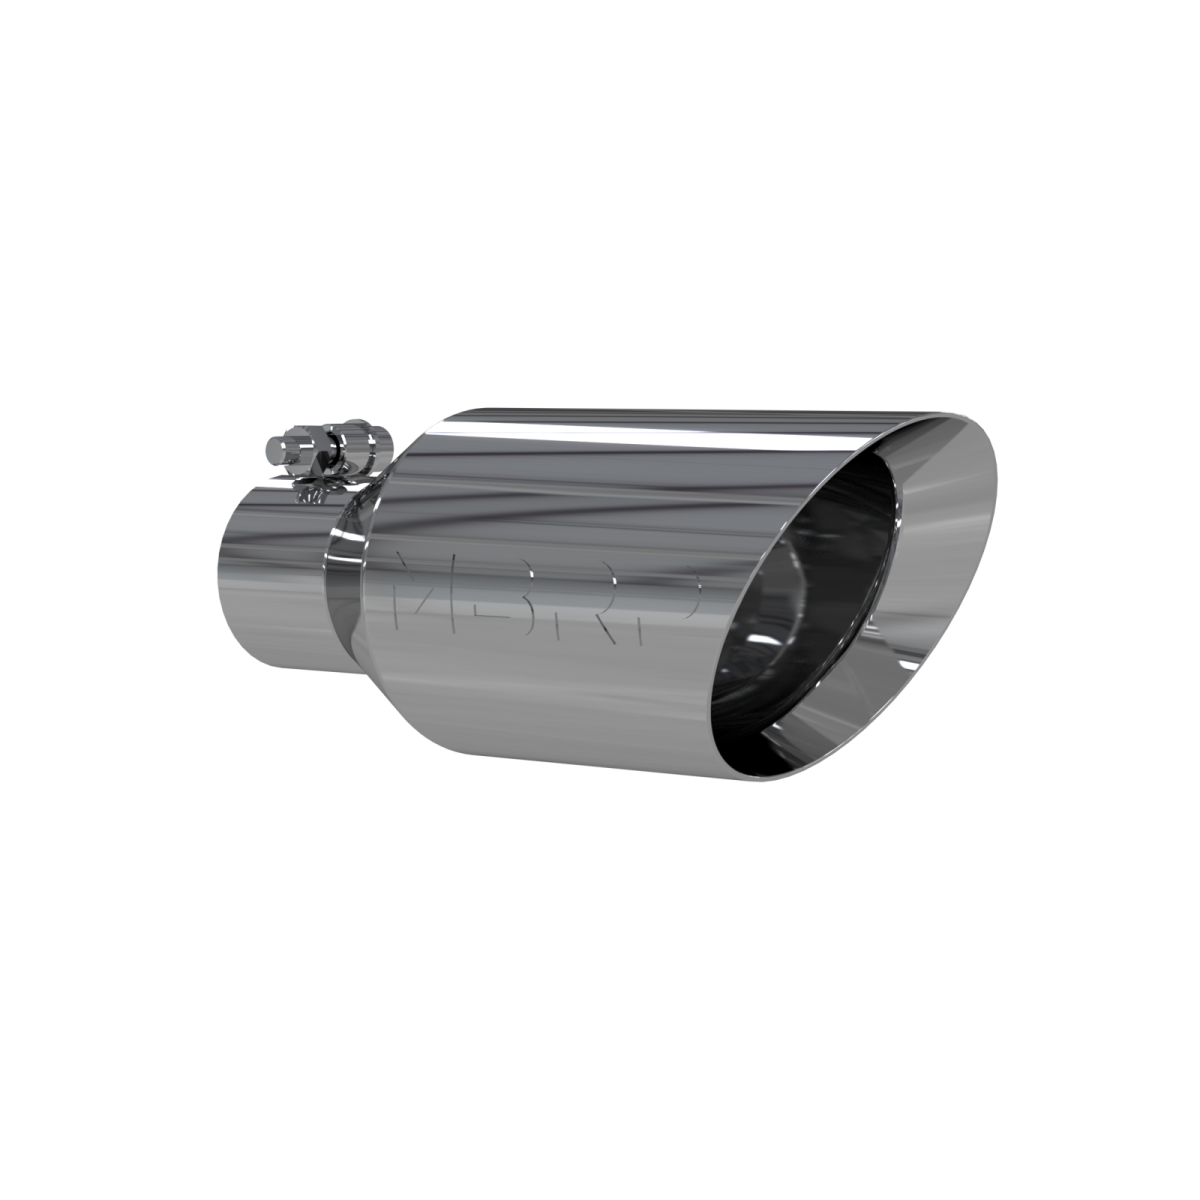 MBRP - MBRP Exhaust Tip 4 1/2 Inch O.D. Dual Wall Angle Rolled End 2.5 Inch Inlet 11 Inch Length T304 Stainless Steel T5161